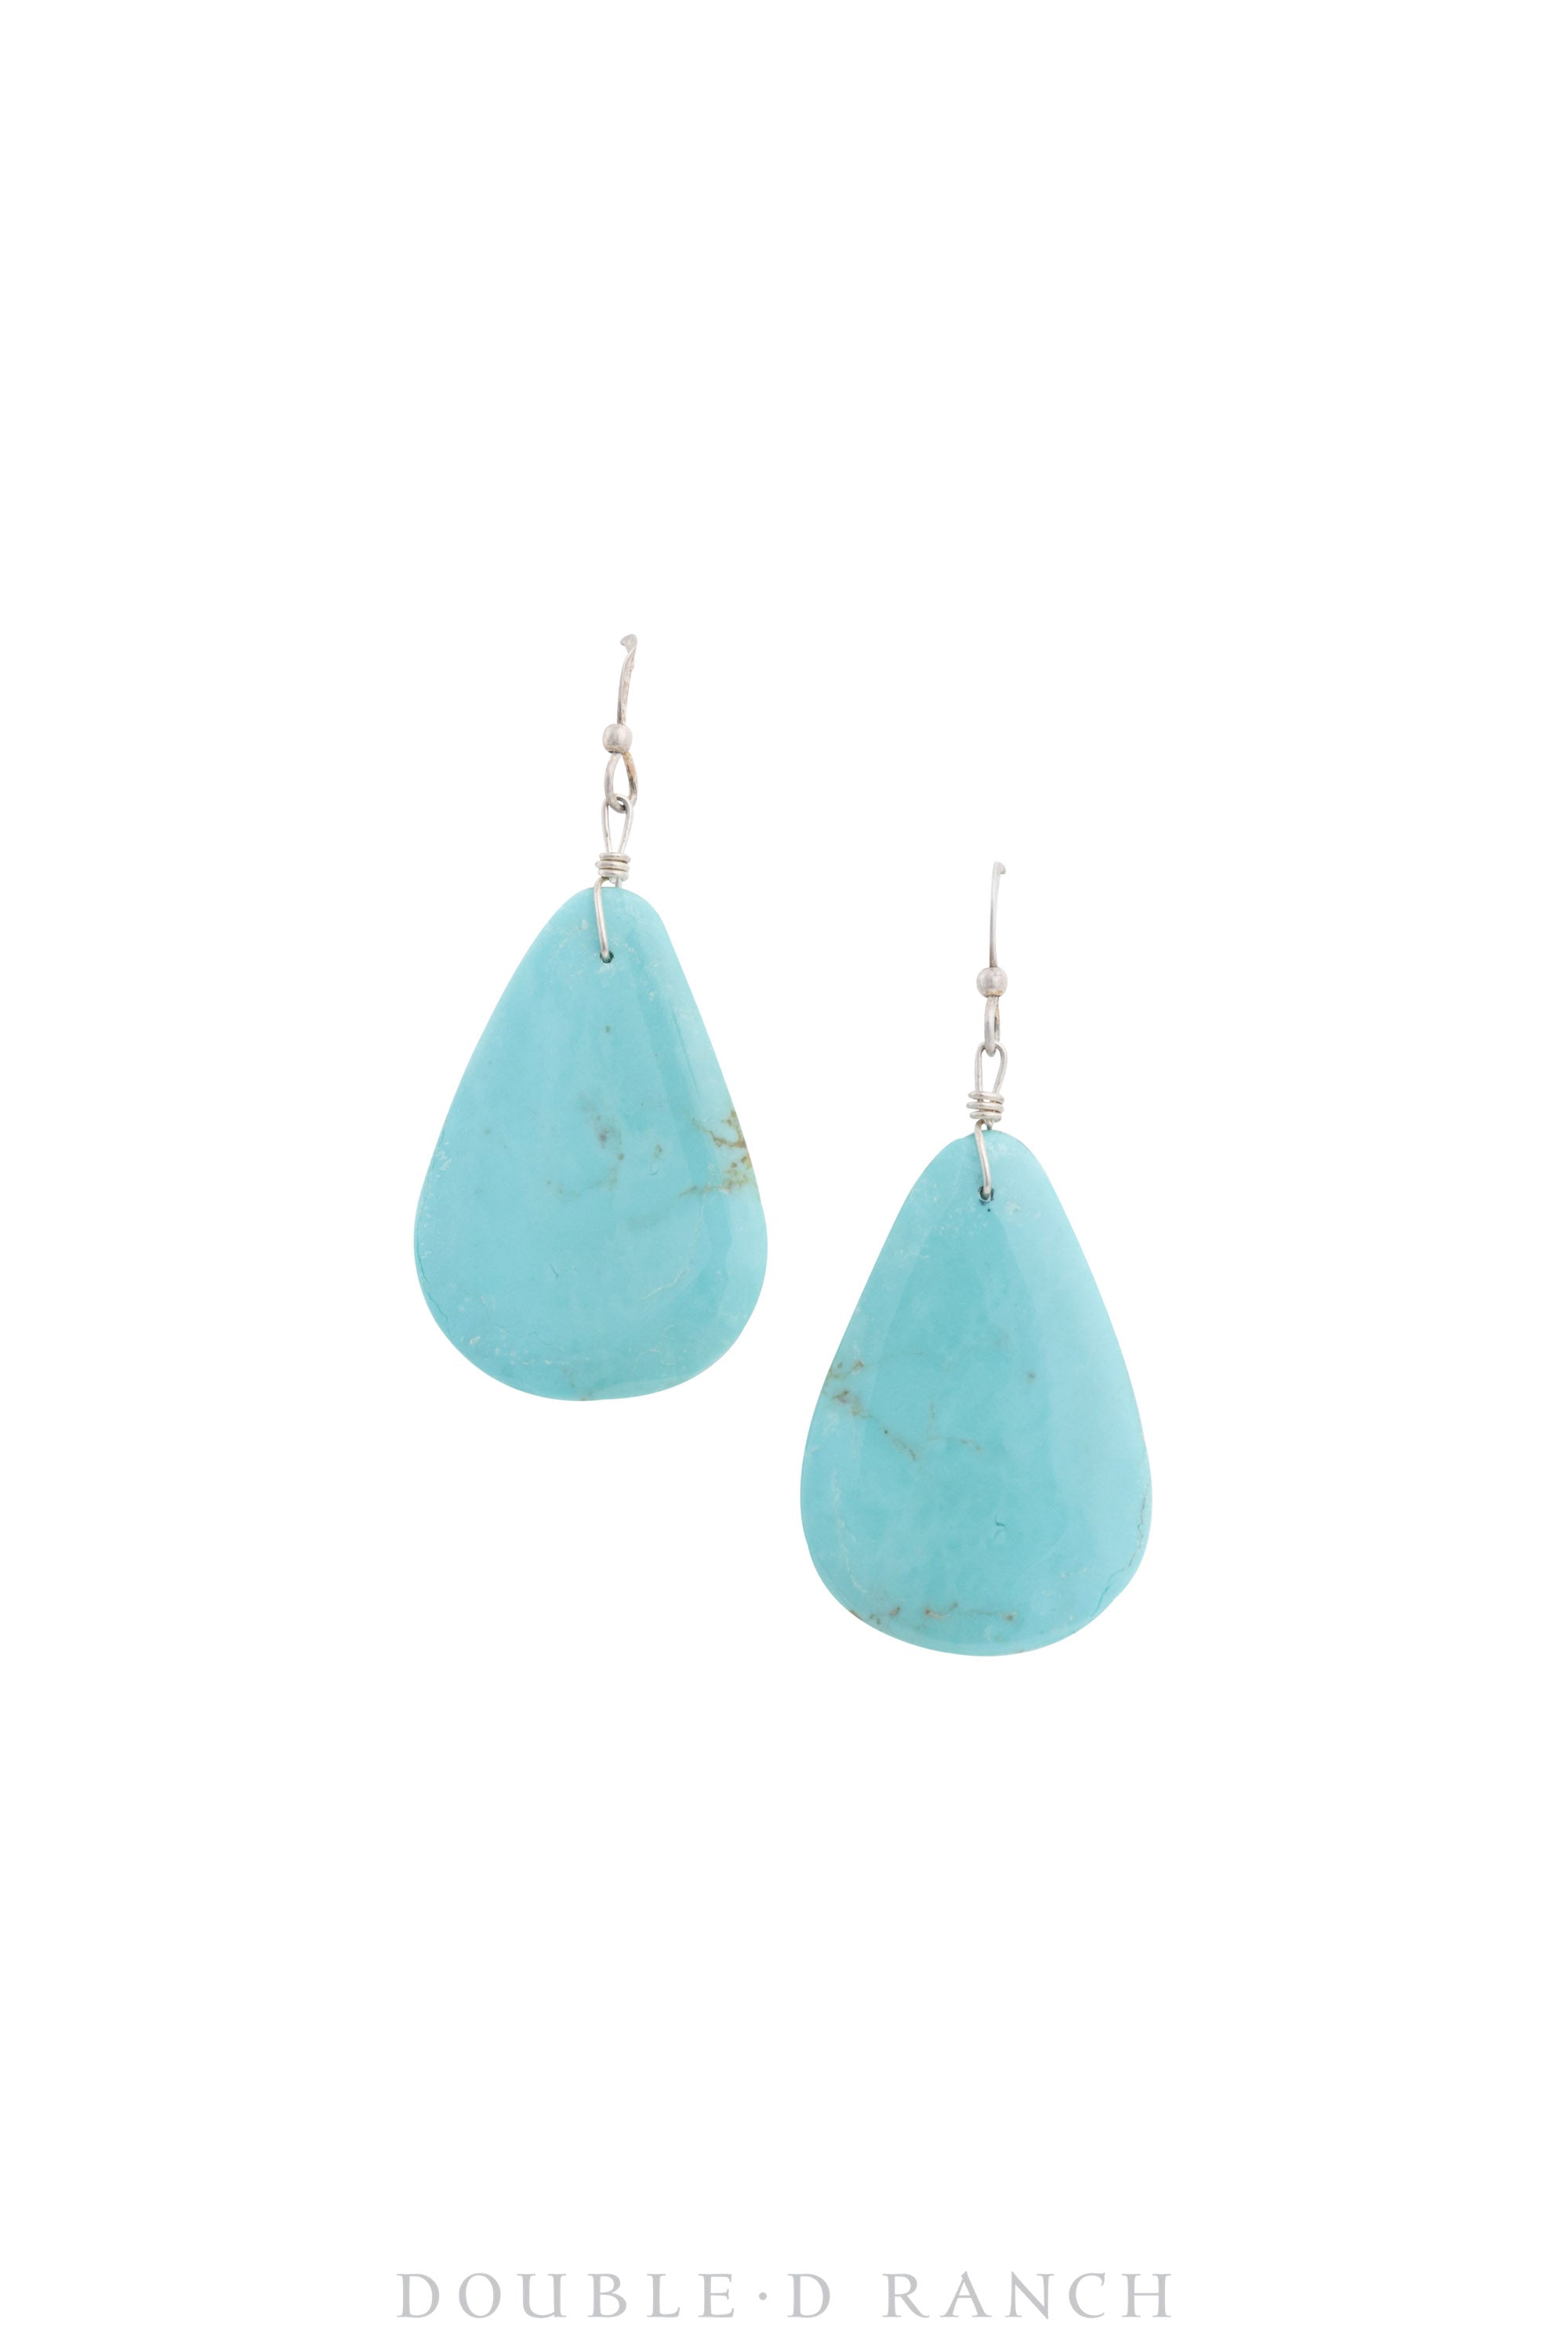 Earrings, Slab, Turquoise, Tabs, Artisan, Contemporary, 1486